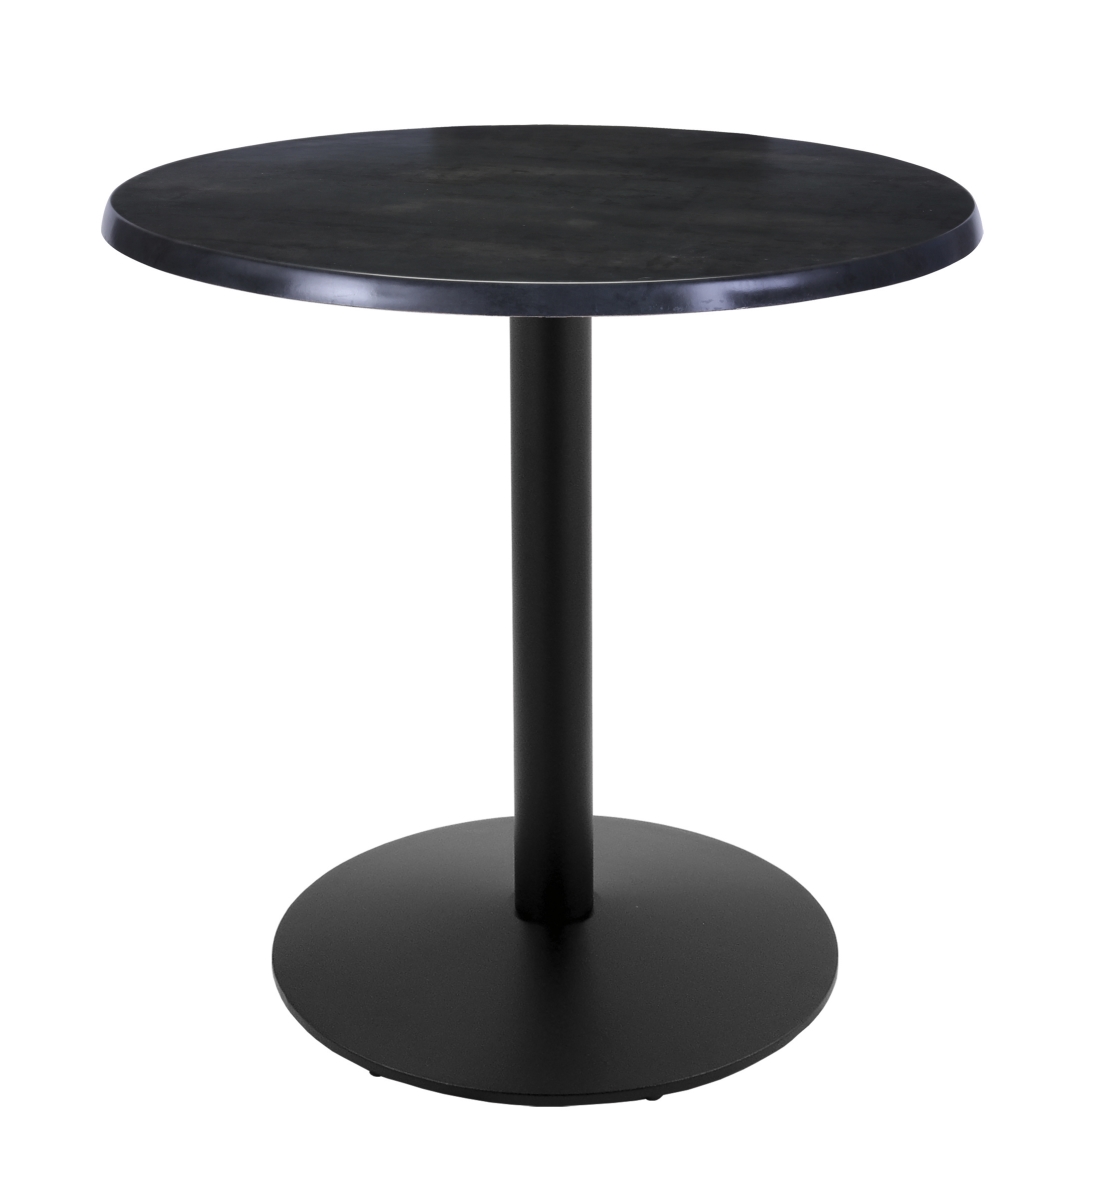 Holland Bar Stool OD214-2236BWOD30RBlkStl 36 in. Black Table with 30 in. Diameter Indoor & Outdoor Black Steel Round Top